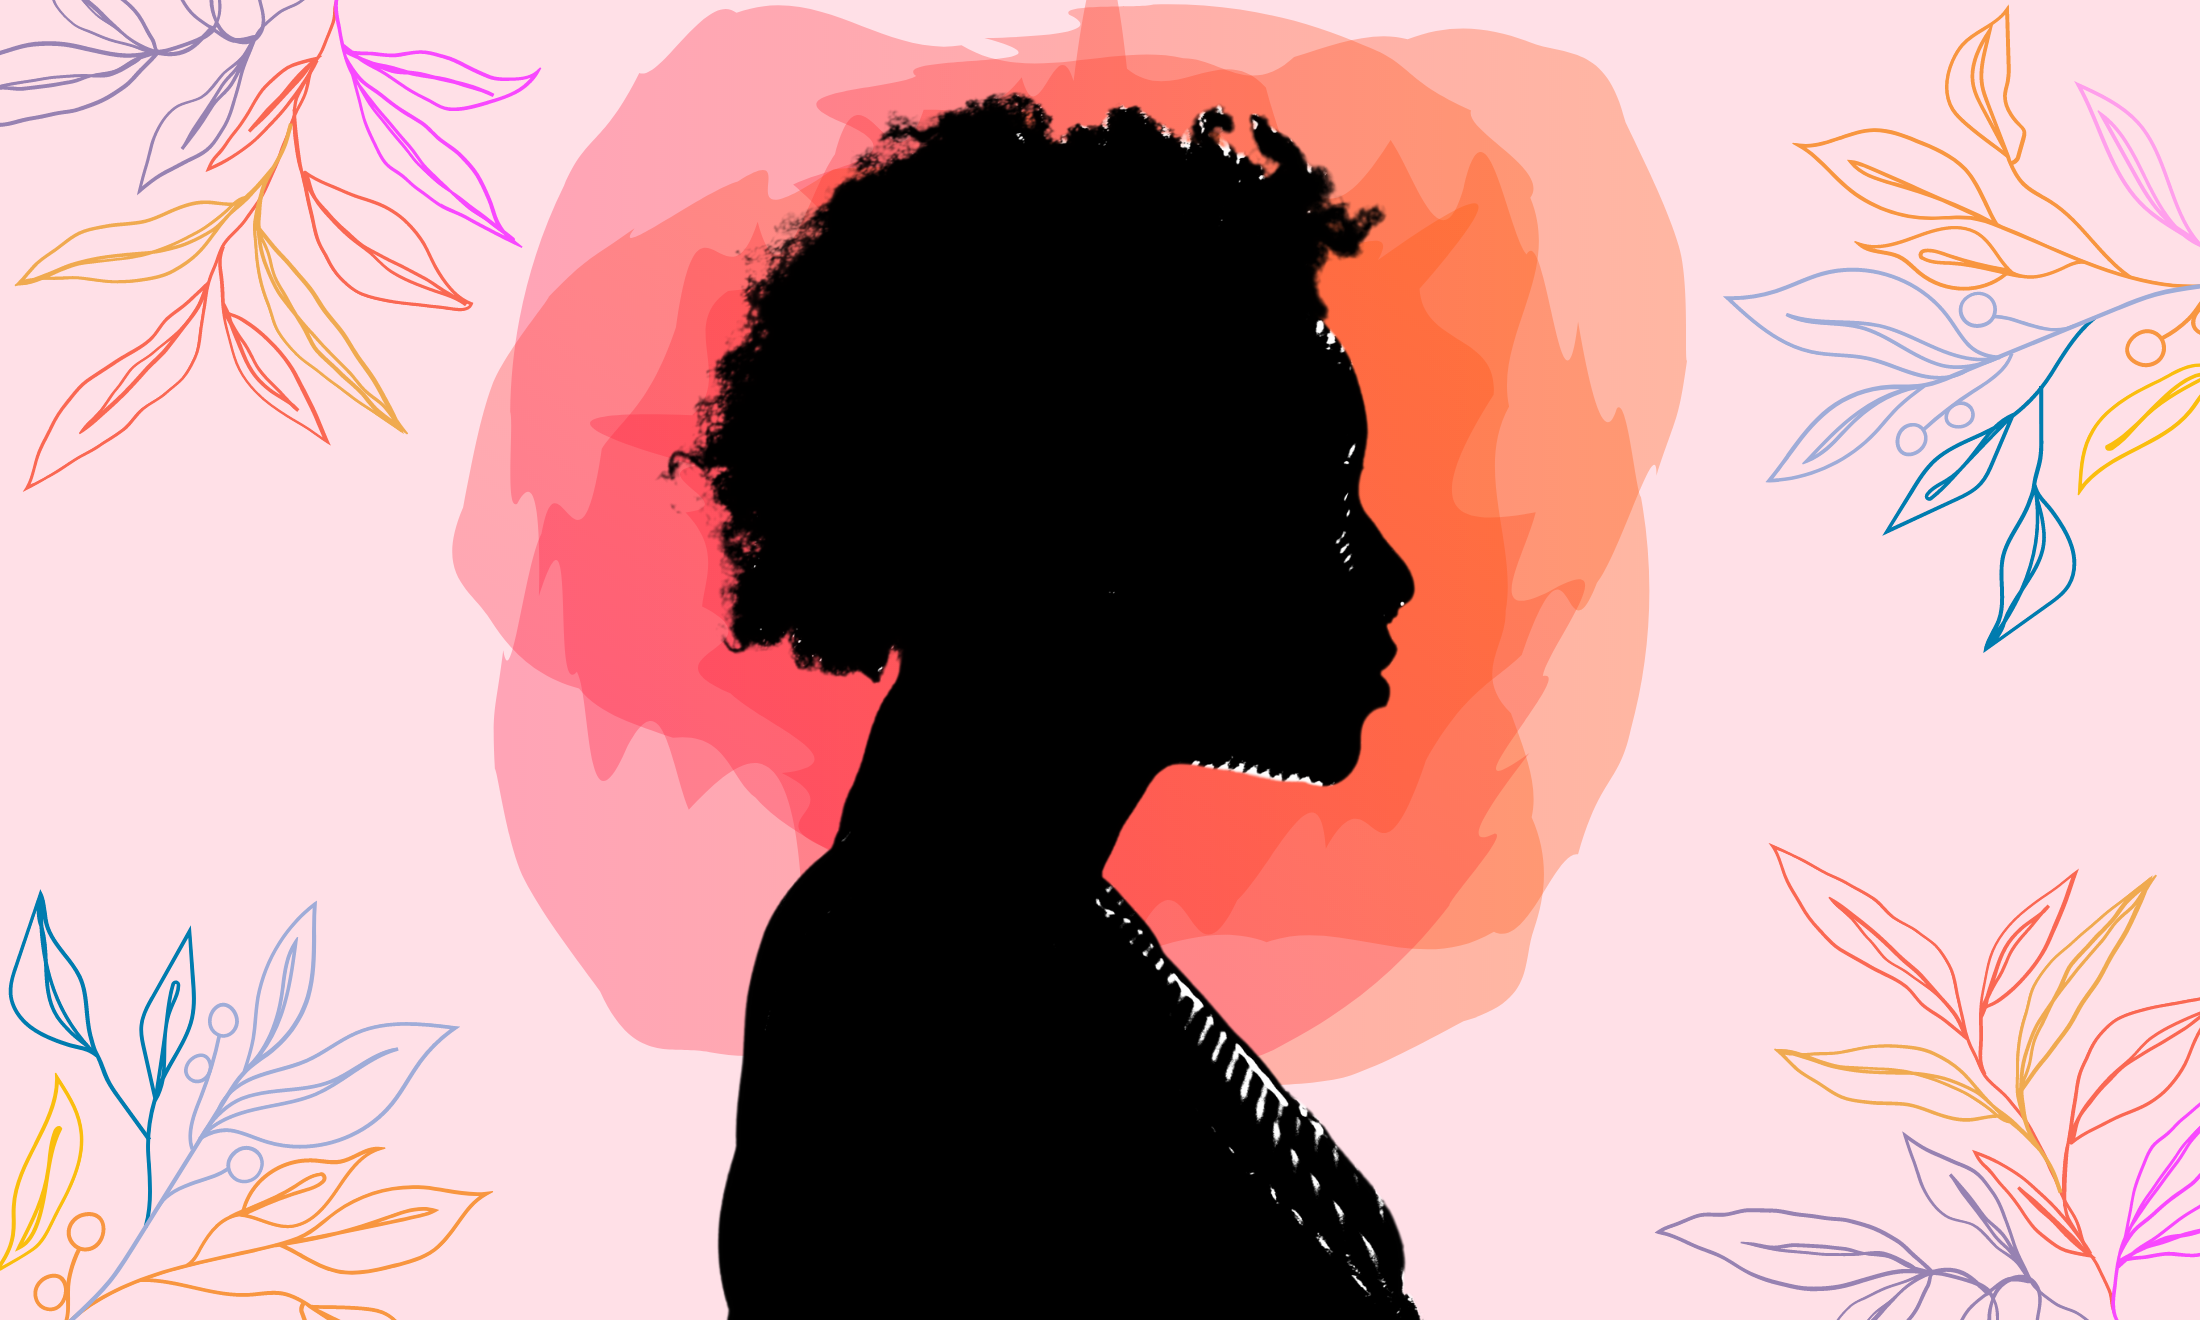 Black and brown women need protection from abuse. Here’s where to start